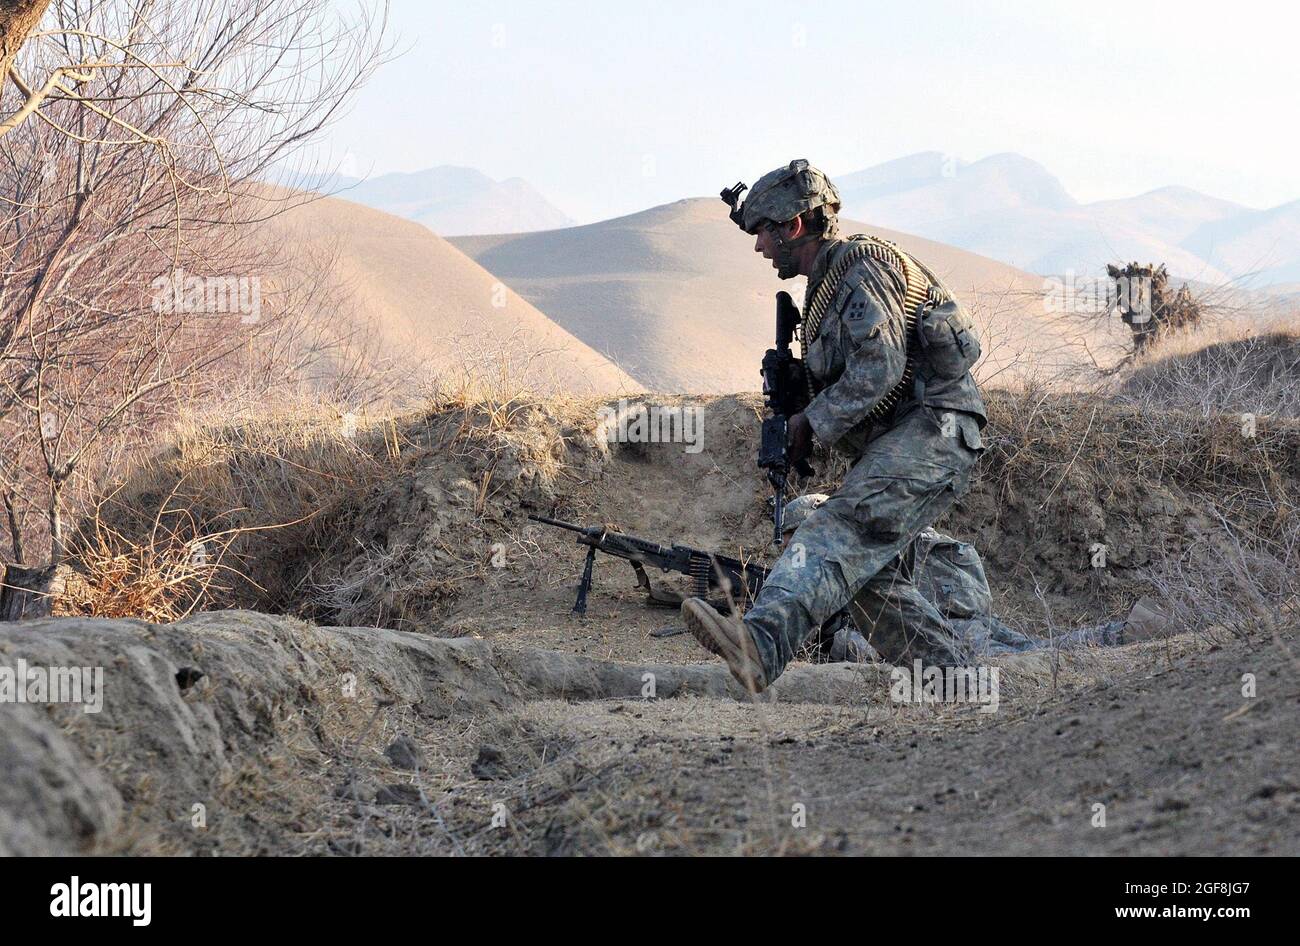 Sgt. Timothy Cooper, a scout with White Platoon, Bulldog Troop, 7th Squadron, 10th Cavalry Regiment, dives from incoming enemy fire during a recon patrol in Bala Murghab district, Badghis province, Afghanistan, Jan. 9. Husk and the other scouts located enemy positions to adjust mortar fire on target. Stock Photo